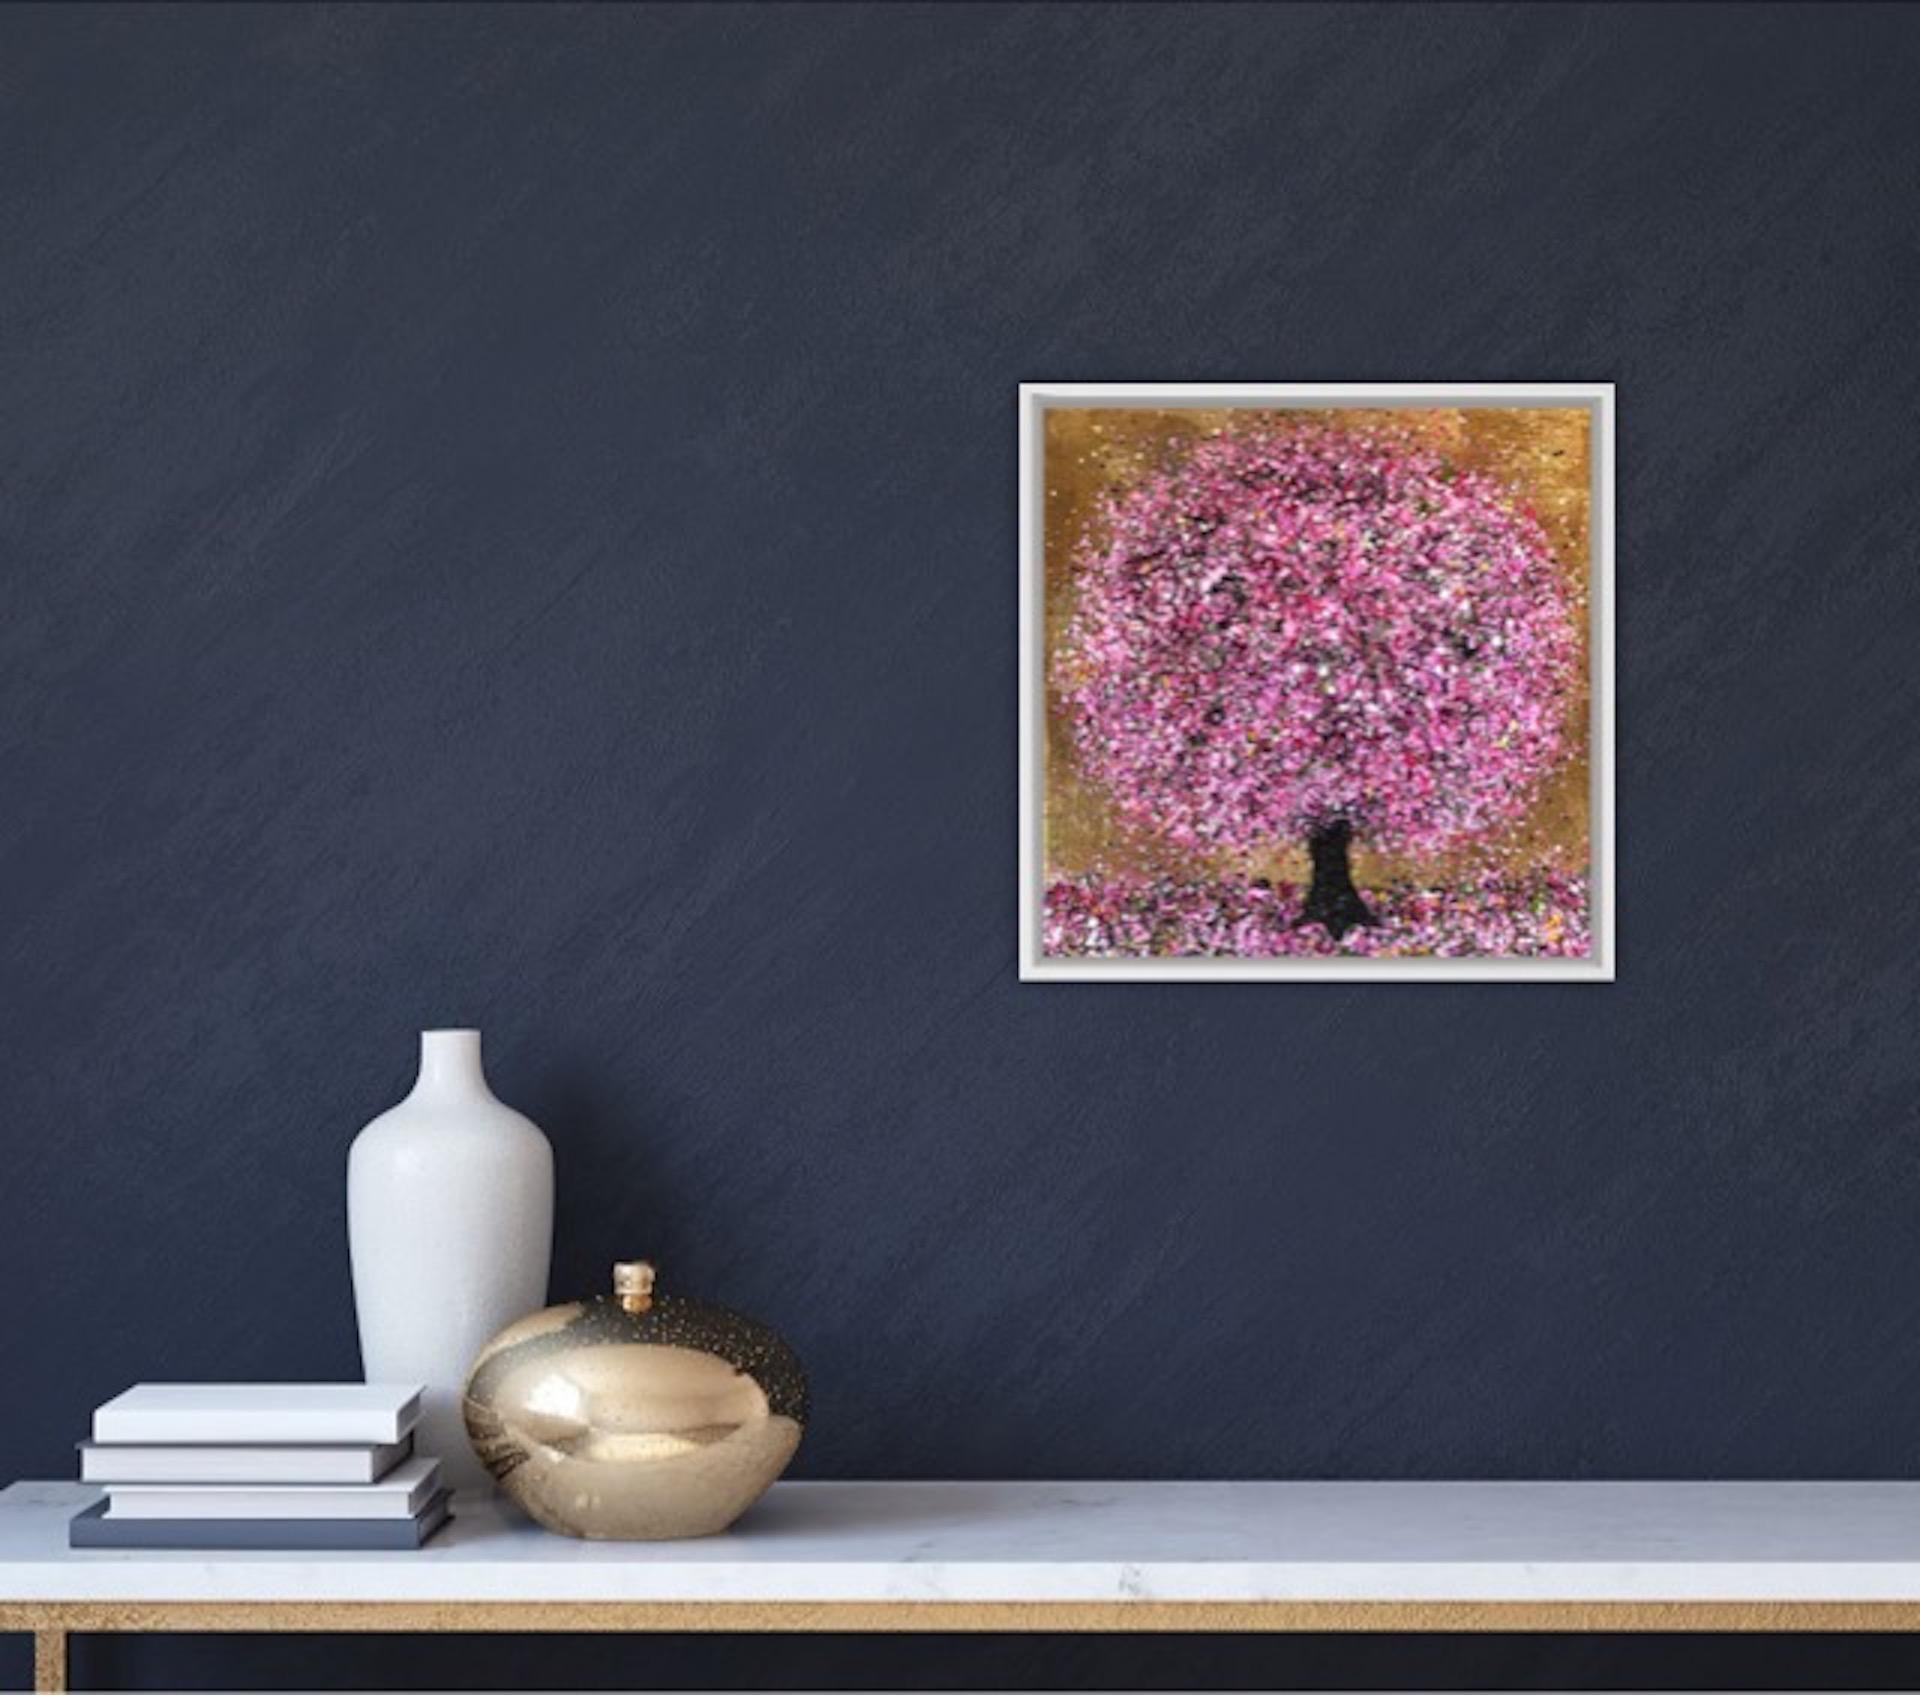 Nicky Chubb
Happy Pink
Original Landscape Painting
Acrylic Paint and Gold Leaf on Canvas
Canvas Size: H 30cm x W 30cm x D 4cm
Sold Unframed
Free Shipping

Happy Pink is an original painting by Nicky Chubb. The bright pink works with the gold leaf